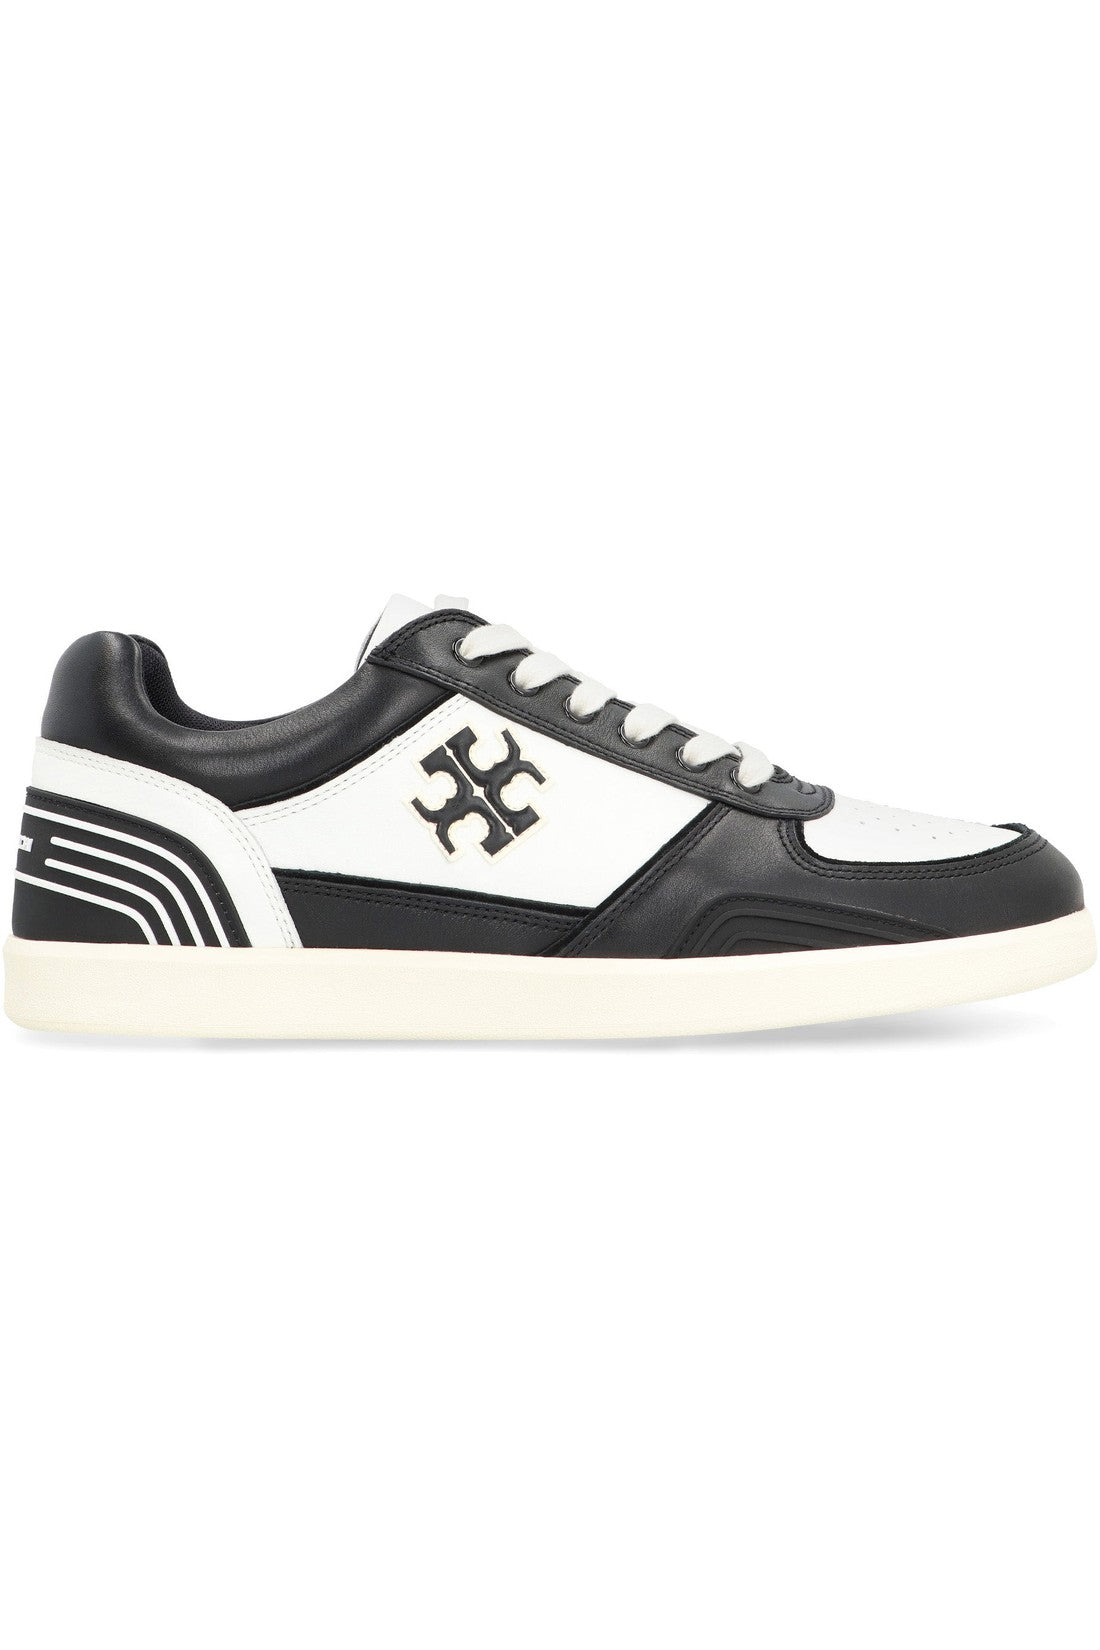 Tory Burch-OUTLET-SALE-Clover Court Leather low-top sneakers-ARCHIVIST